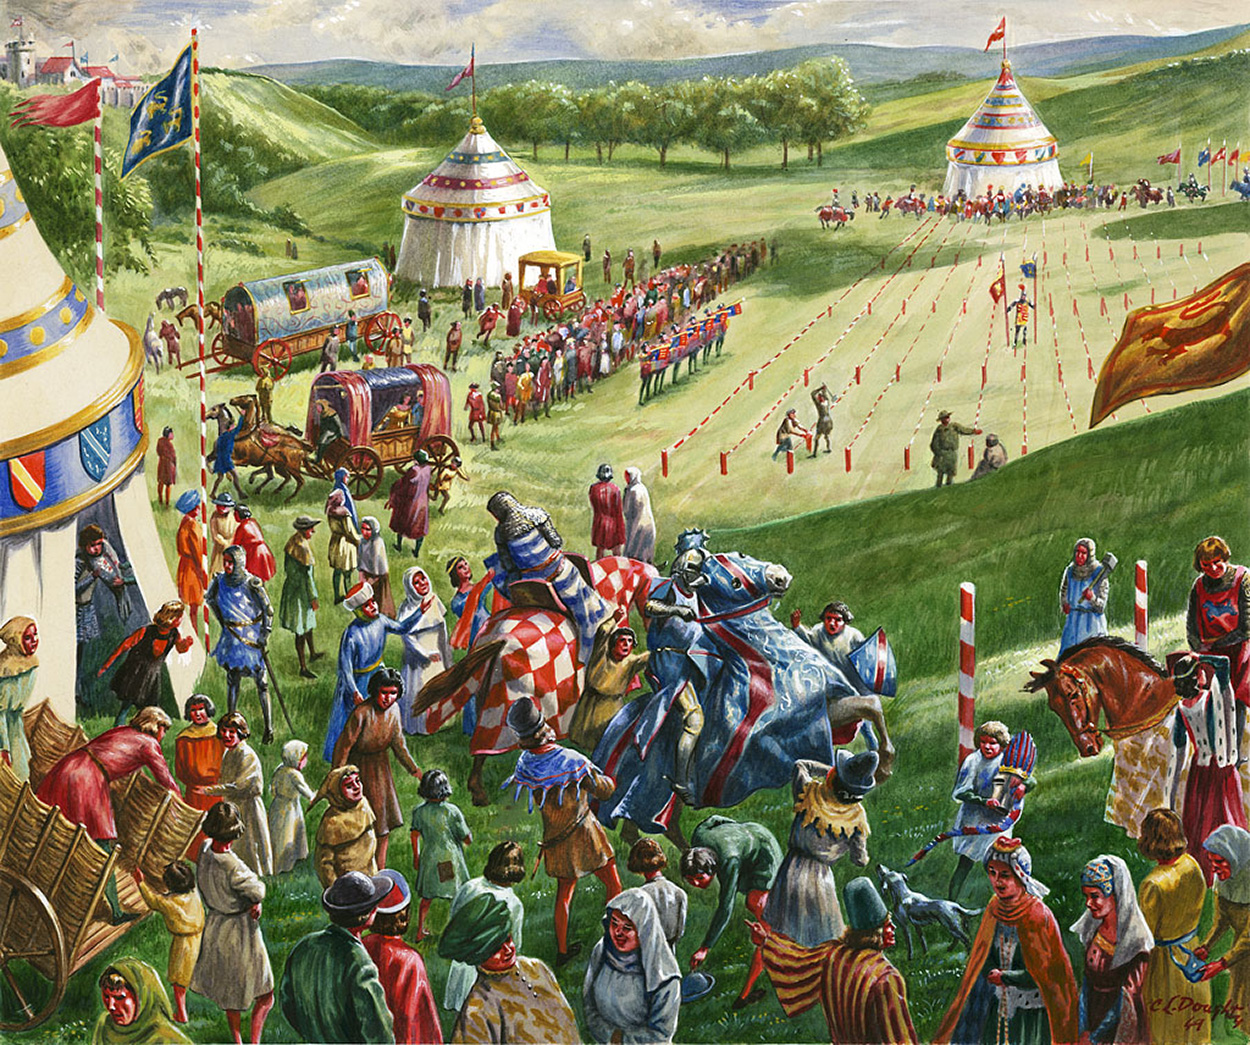 Medieval Tournament (Original) (Signed) art by British History (Doughty) at The Illustration Art Gallery